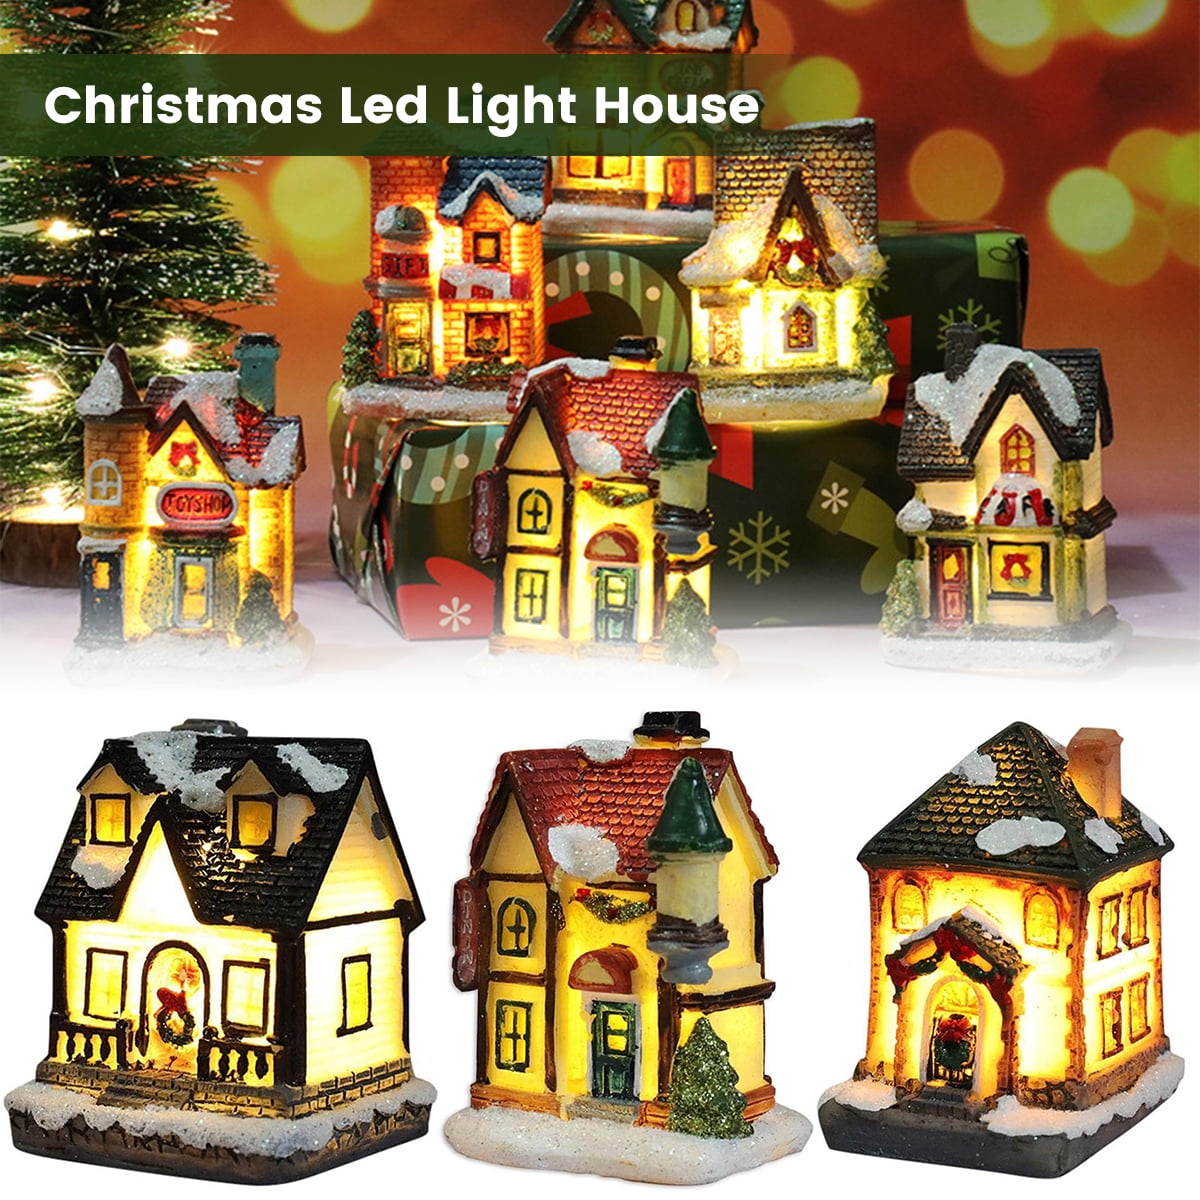 Christmas Figurine Houses Sets with LED Light Tabletop Ornaments Cute for Kid Adult Christmas Snow Scene Village House Building Set 